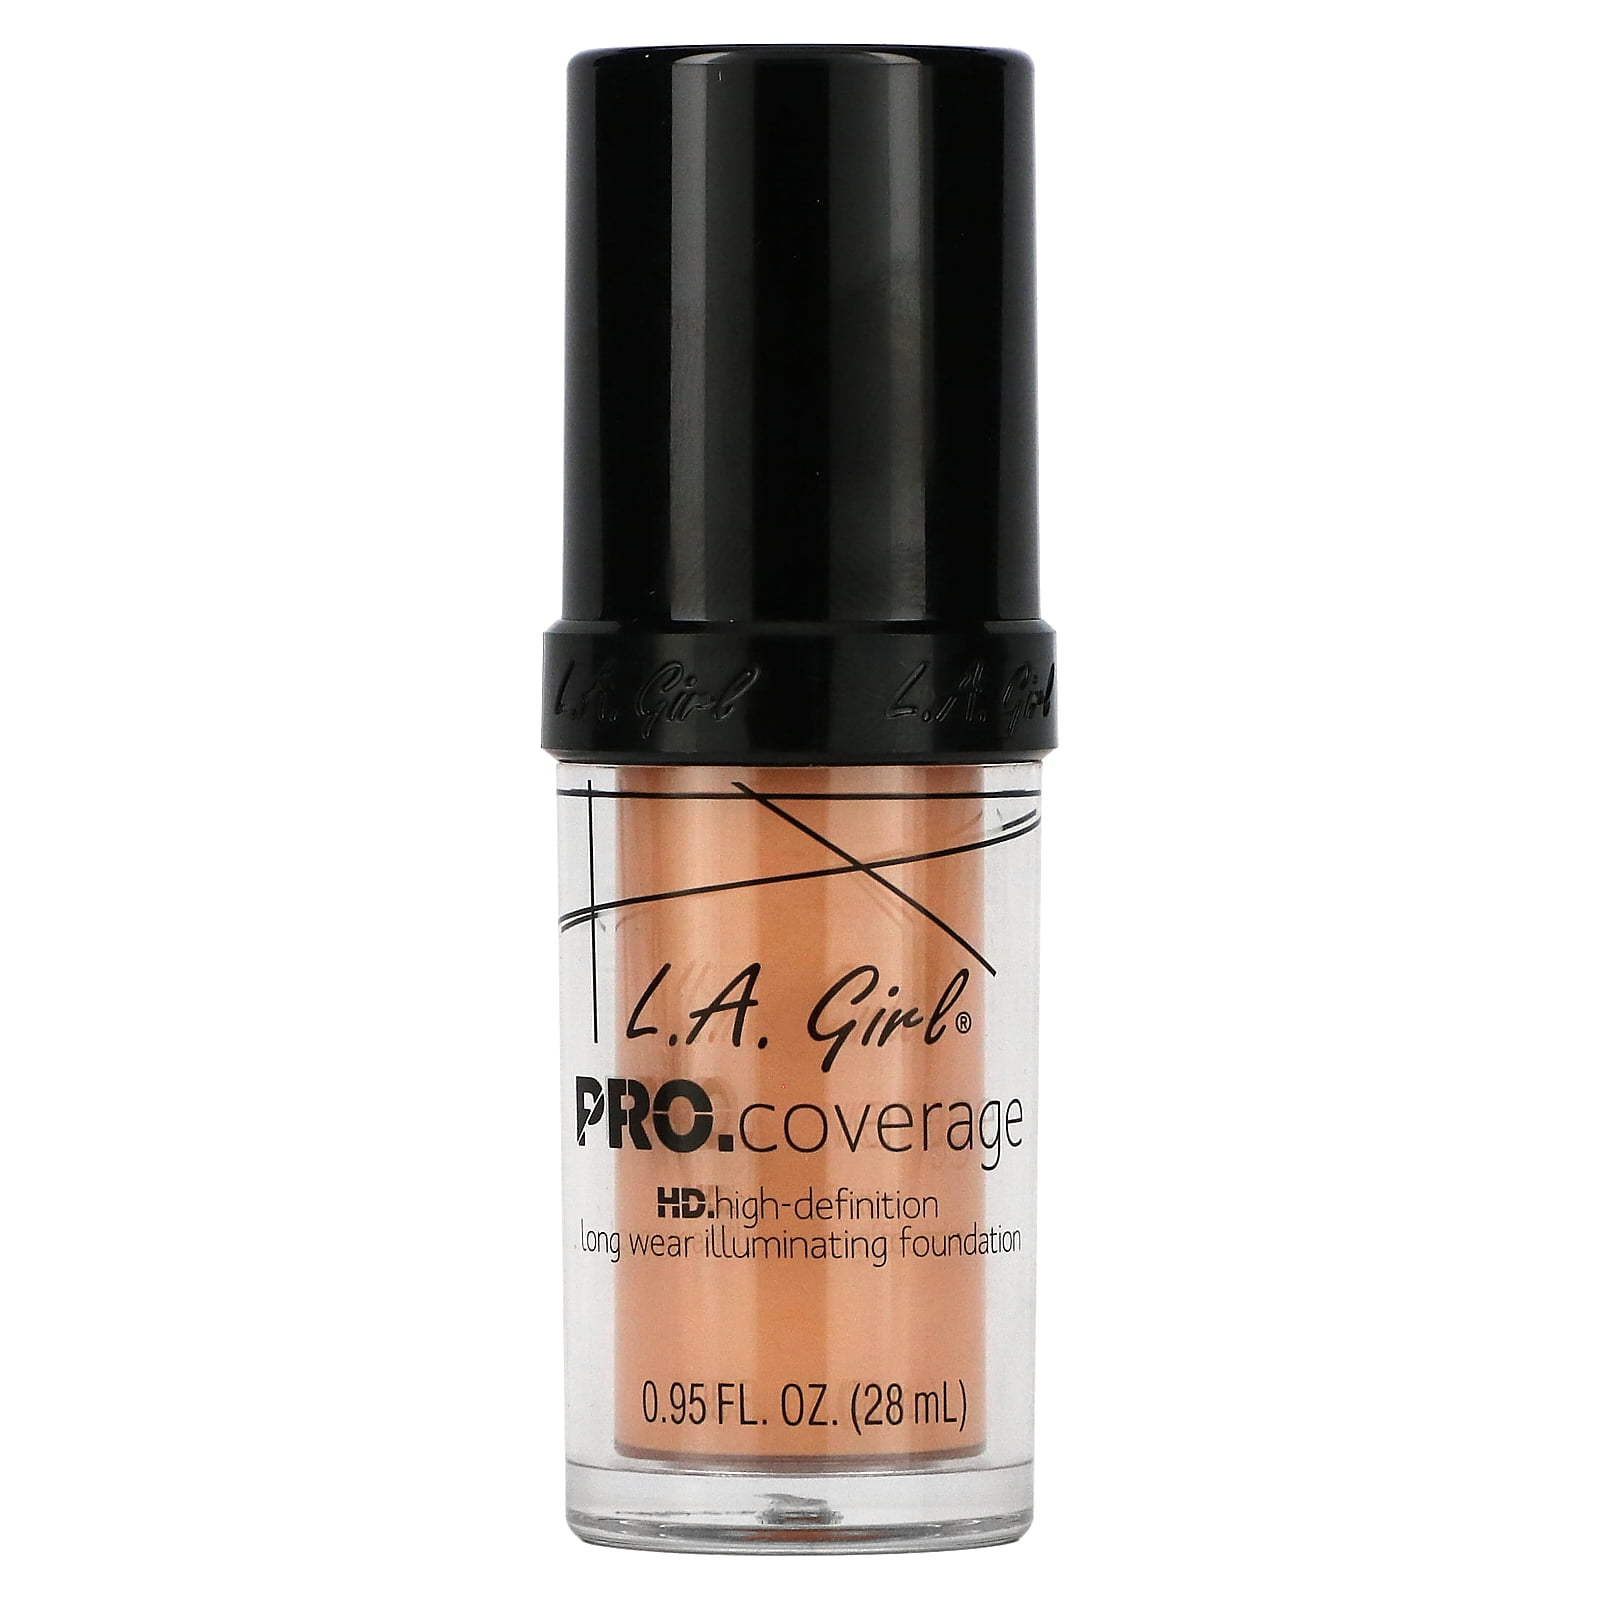 Alternatives comparable to Pro Coverage HD Foundation by L.A. Girl